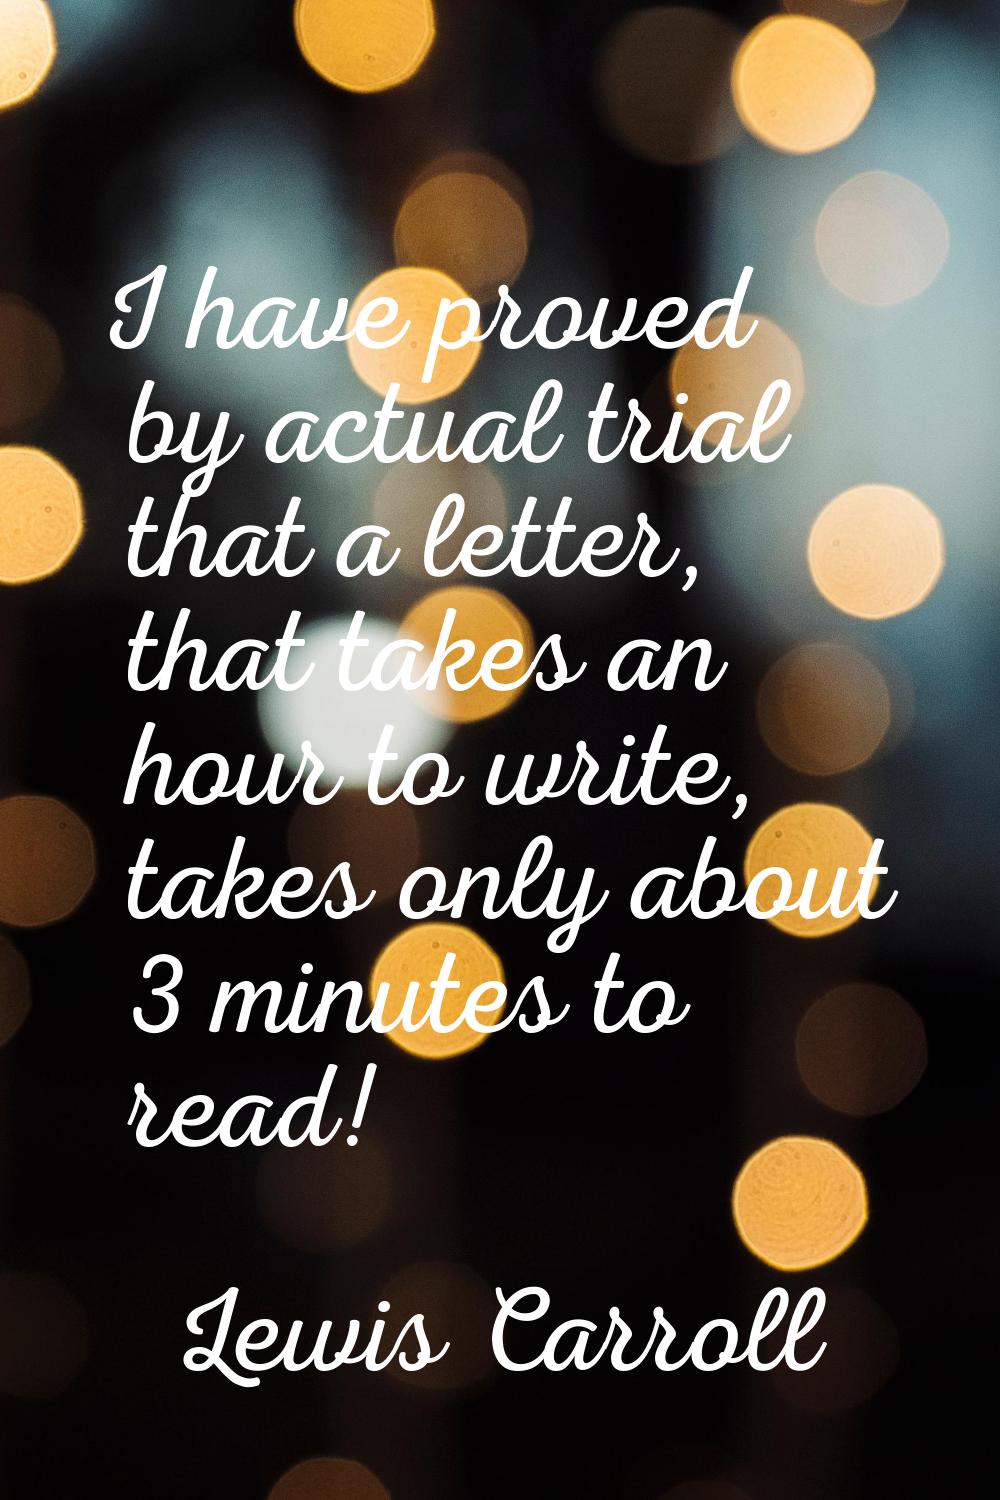 I have proved by actual trial that a letter, that takes an hour to write, takes only about 3 minute